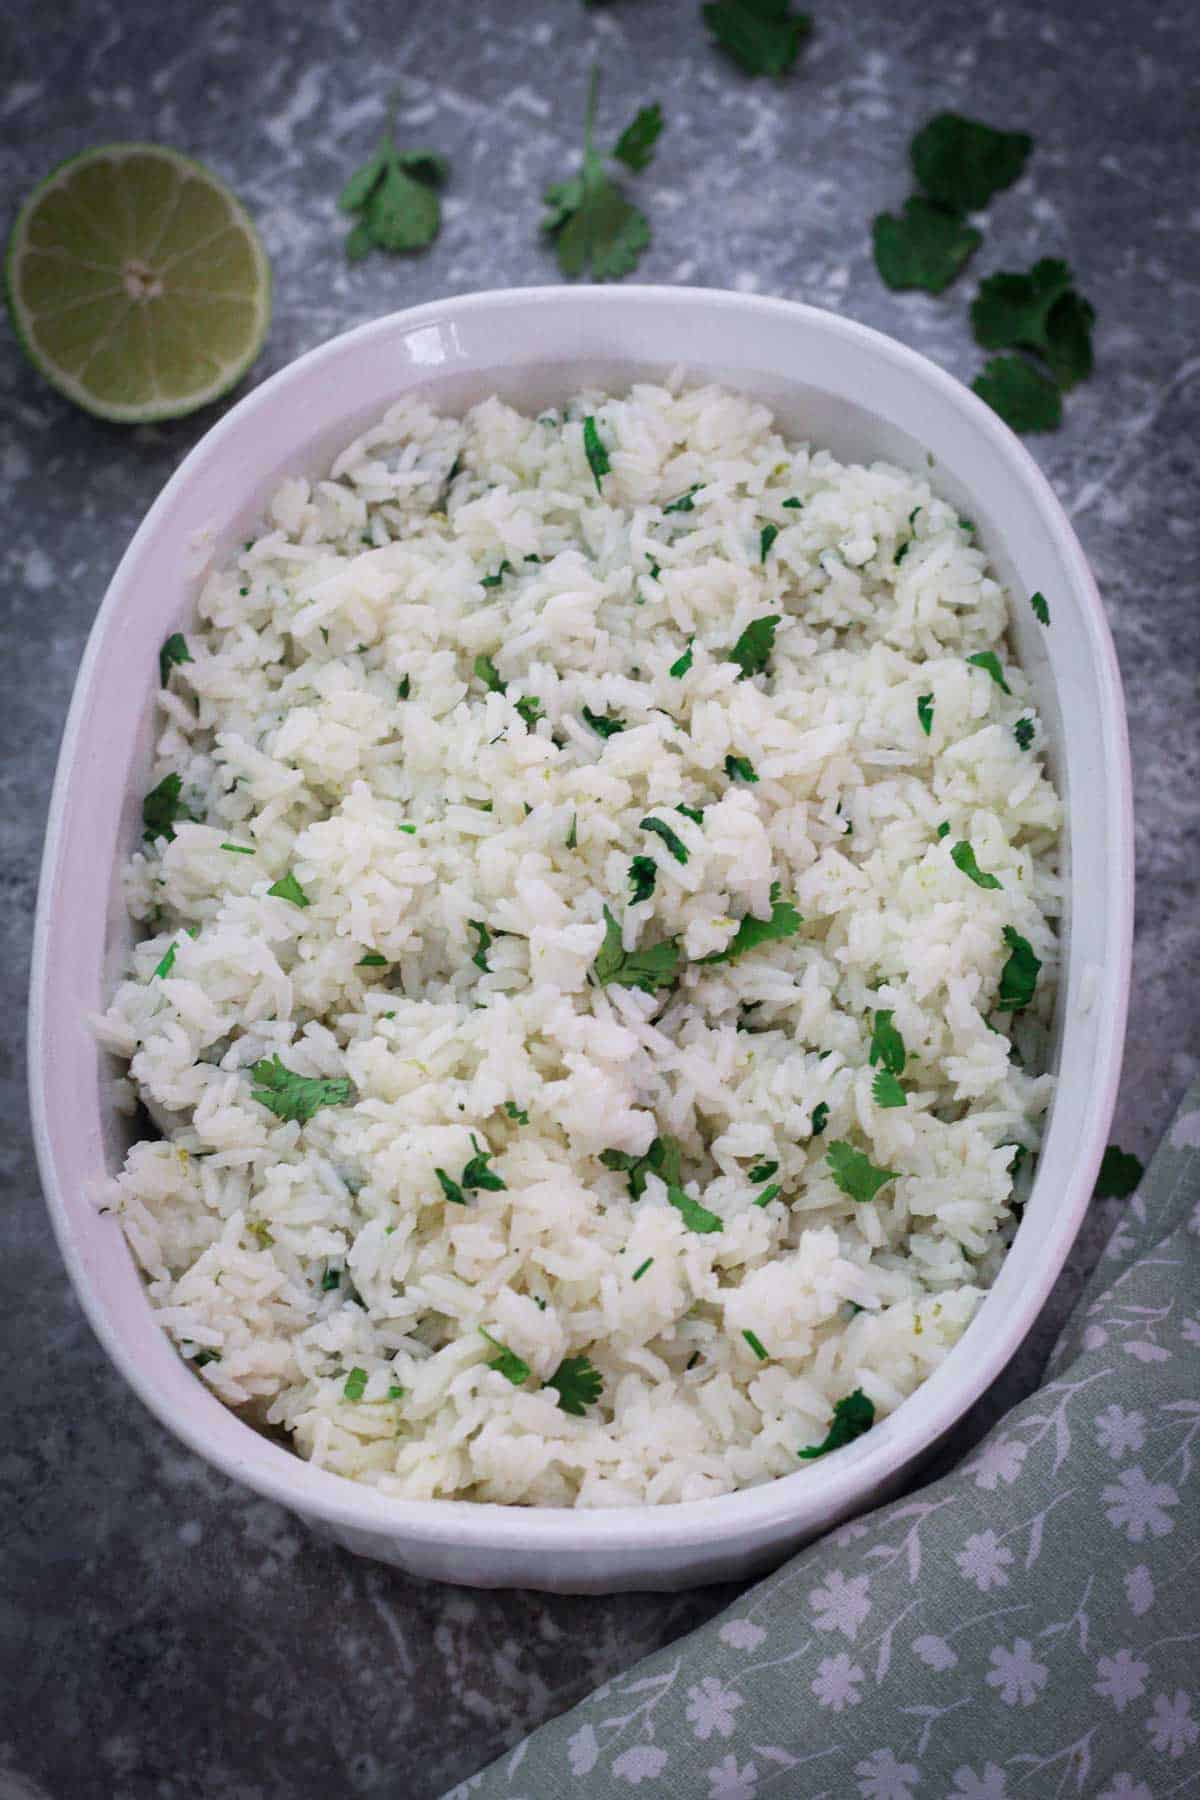 A white ceramic, oval shaped bowl showing cilantro, lime jasmine rice with garnishes around the bowl.